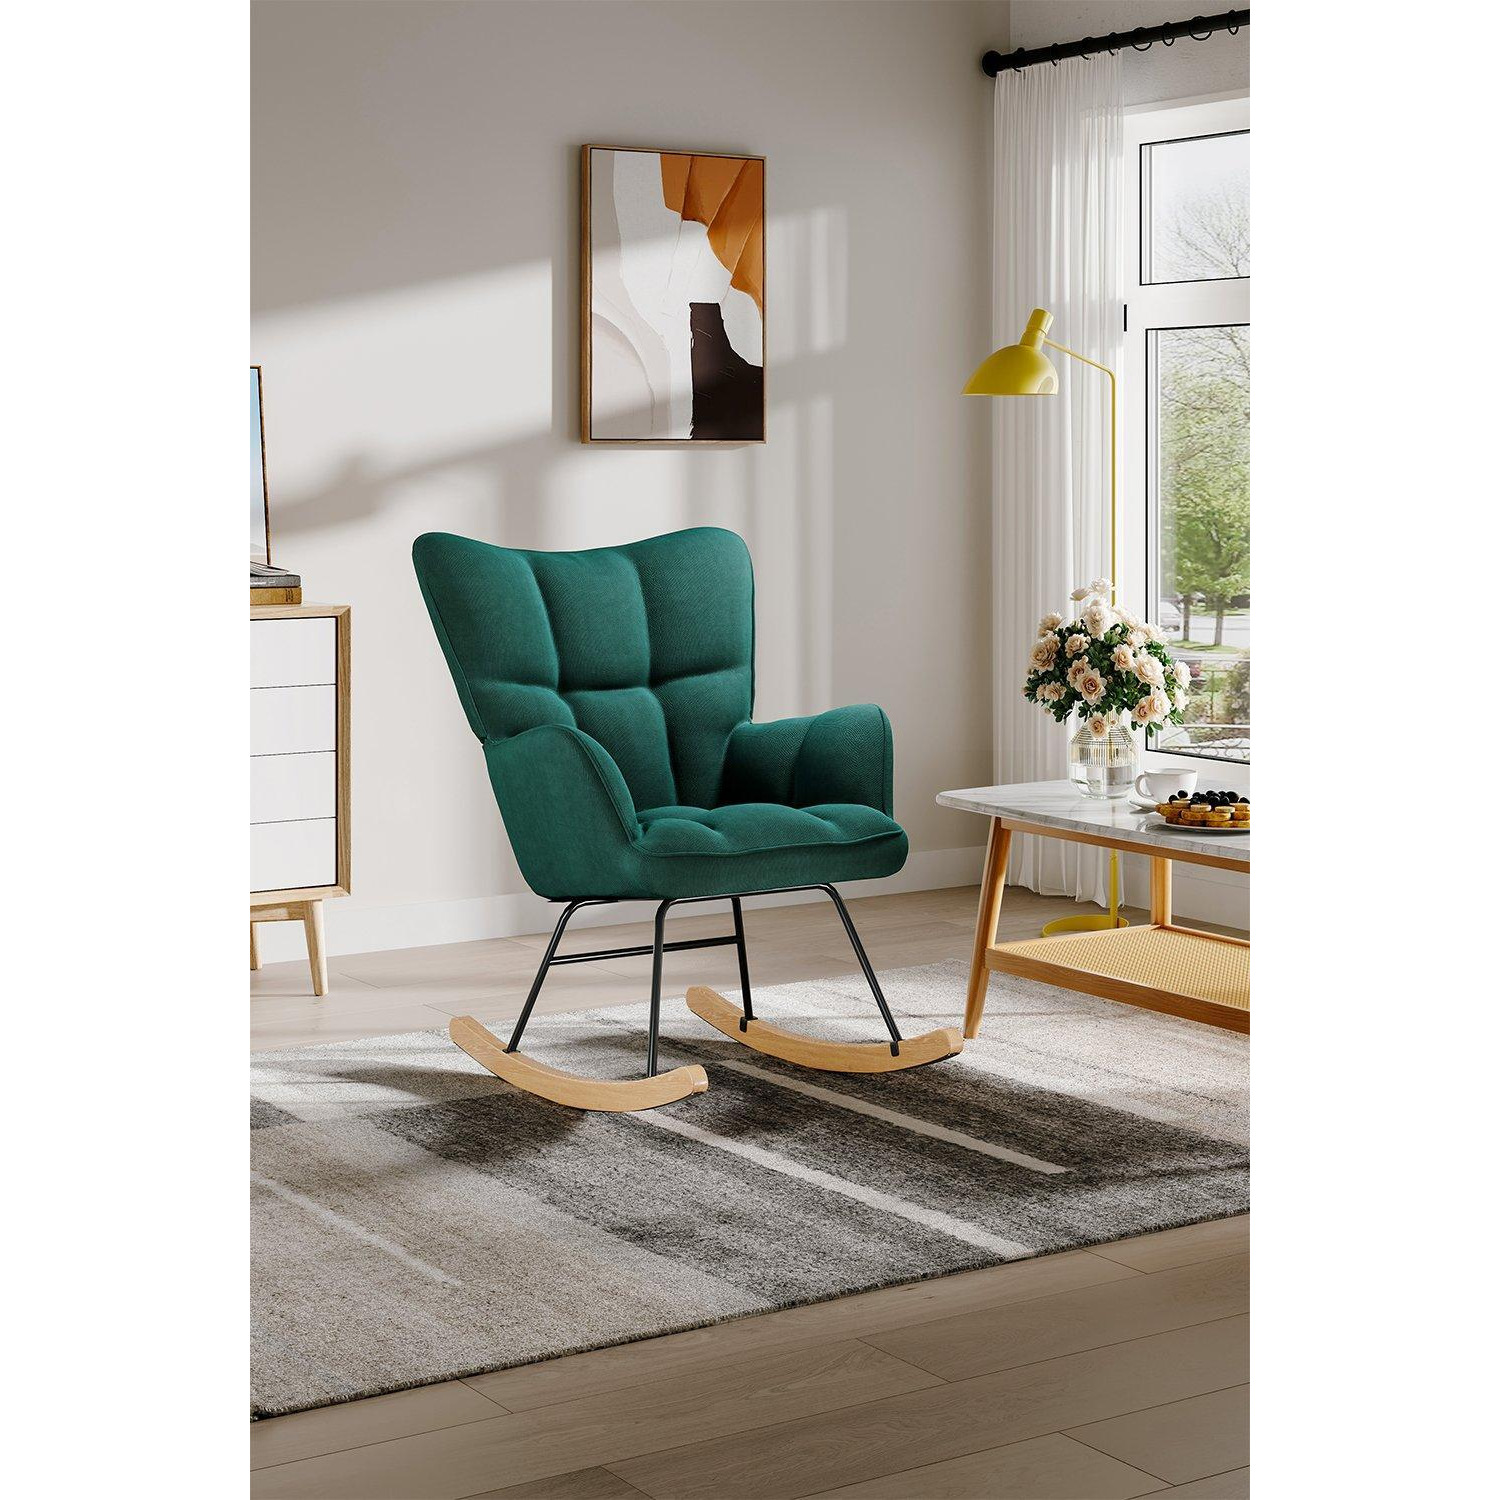 Green Linen Check Tufted Rocking Chair - image 1